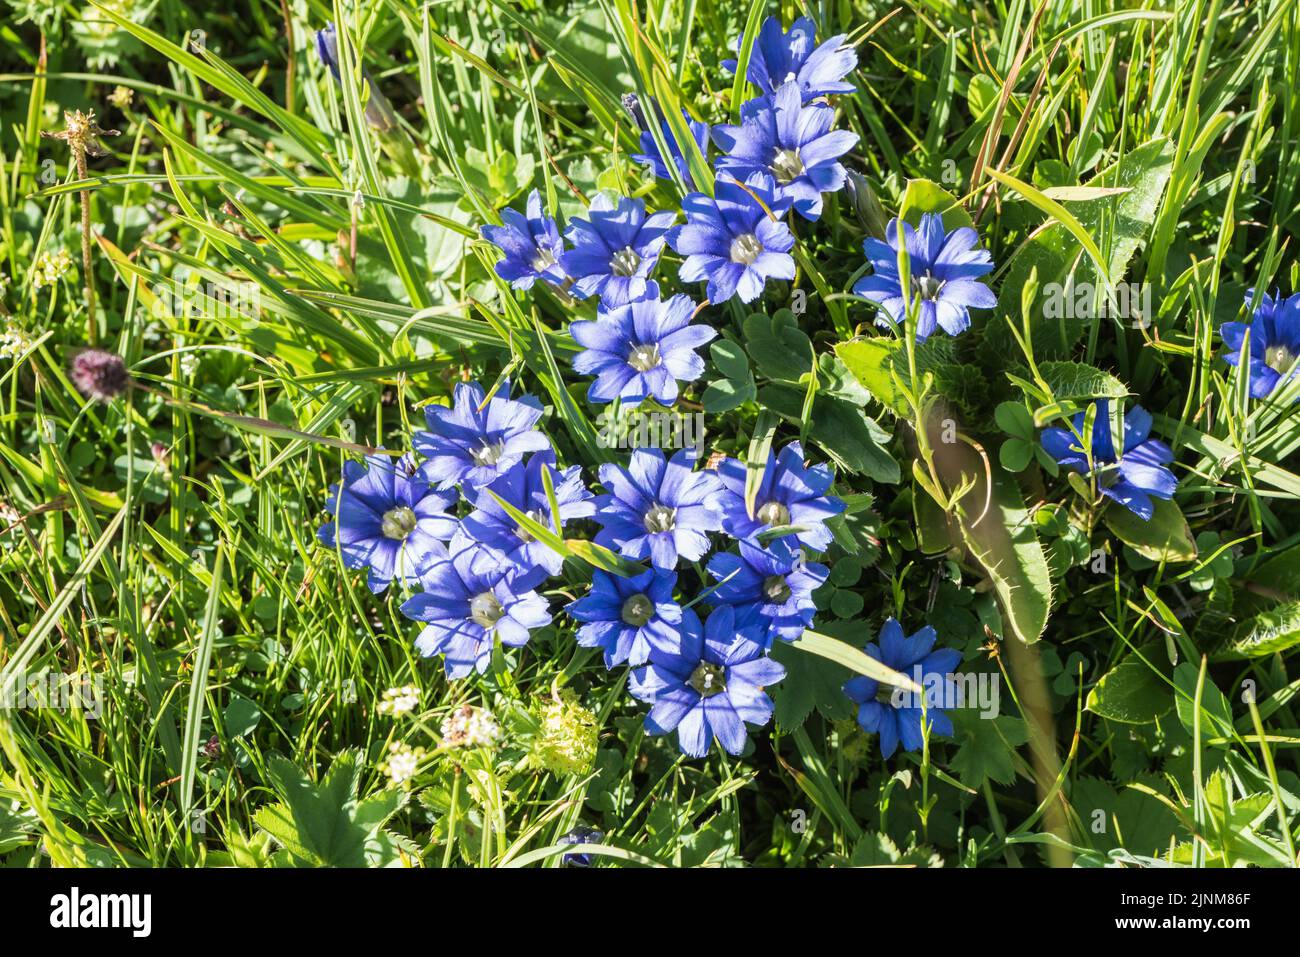 Flowers of the Pyrenees Gentian (Gentiana pyrenaica) Stock Photo